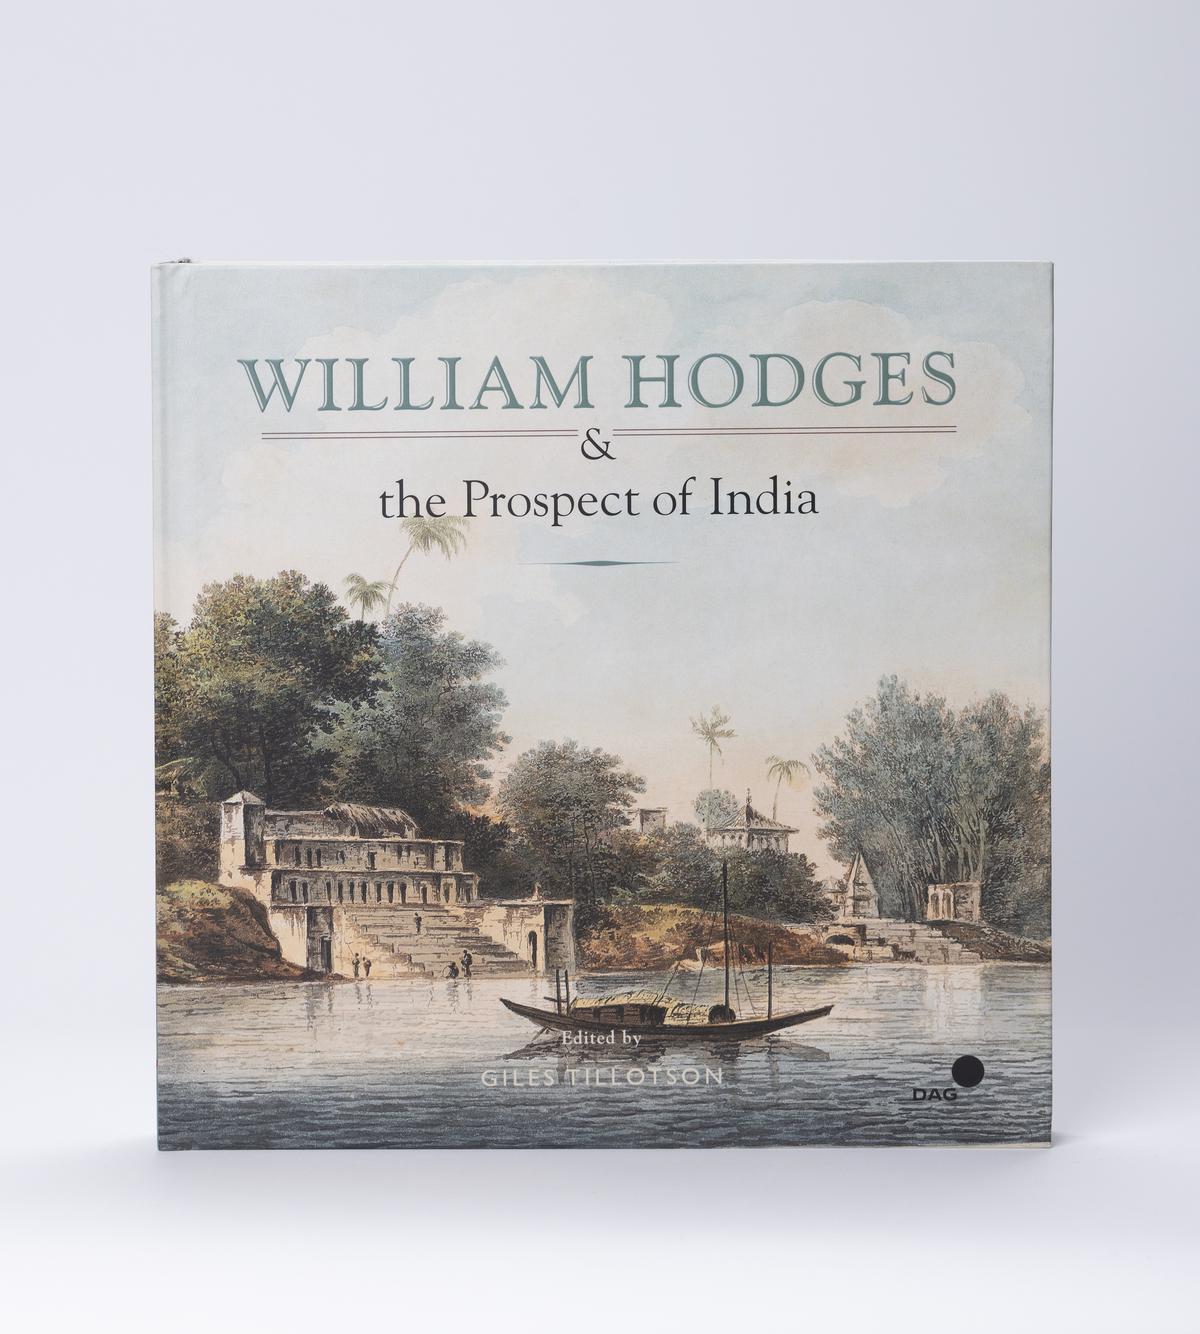 The book that accompanies the exhibition William Hodges and the Prospect of India